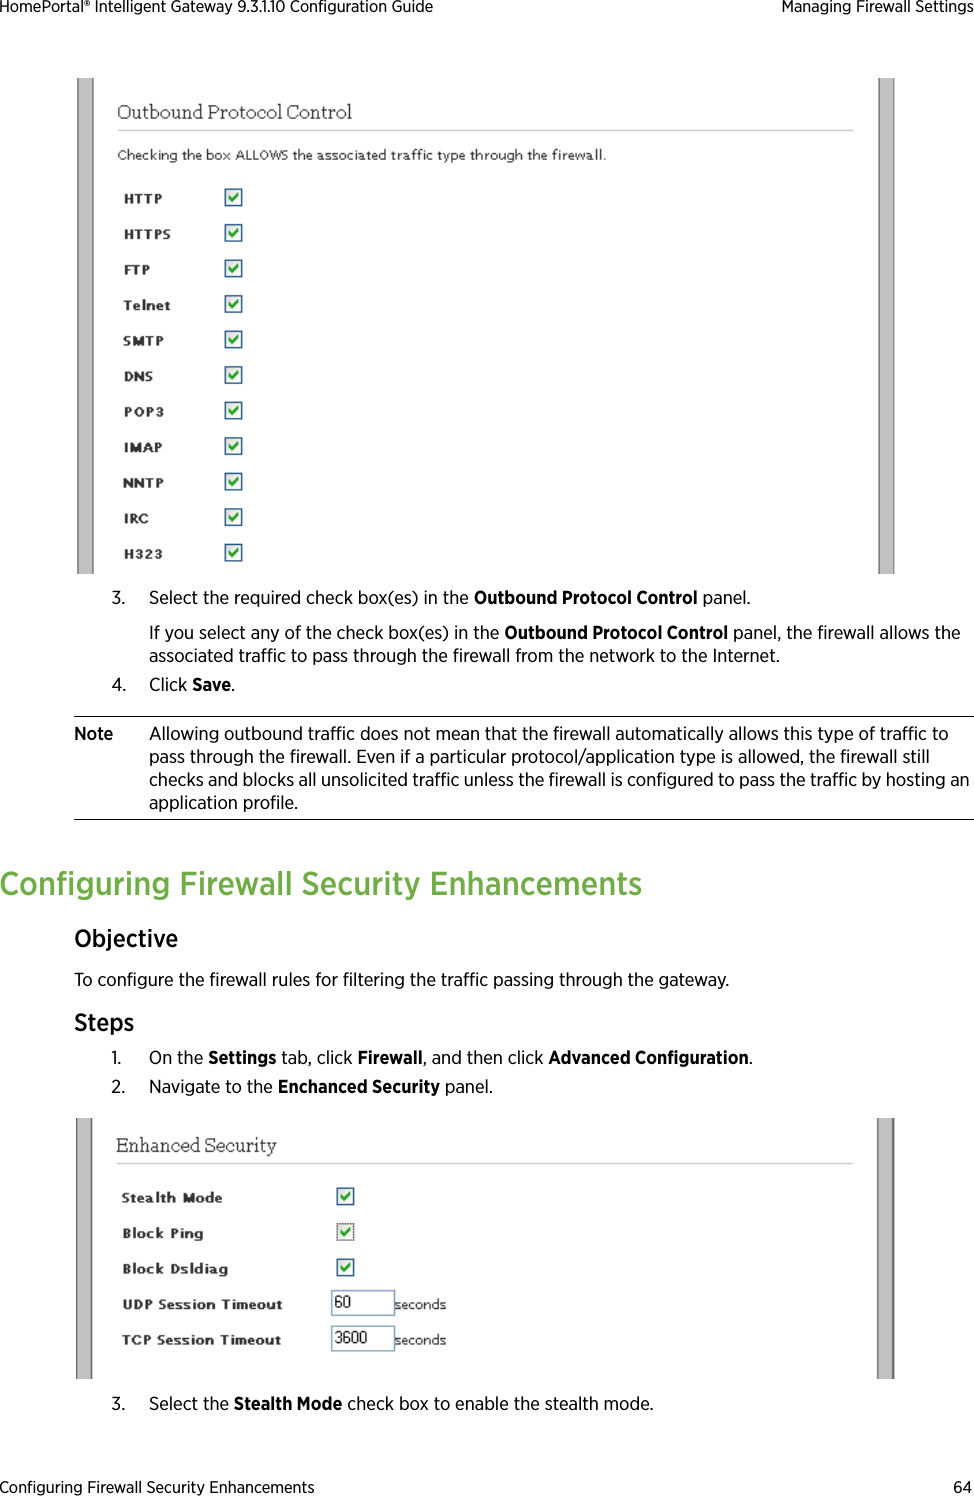 Configuring Firewall Security Enhancements 64HomePortal® Intelligent Gateway 9.3.1.10 Configuration Guide Managing Firewall Settings3. Select the required check box(es) in the Outbound Protocol Control panel. If you select any of the check box(es) in the Outbound Protocol Control panel, the firewall allows the associated traffic to pass through the firewall from the network to the Internet.4. Click Save.Note Allowing outbound traffic does not mean that the firewall automatically allows this type of traffic to pass through the firewall. Even if a particular protocol/application type is allowed, the firewall still checks and blocks all unsolicited traffic unless the firewall is configured to pass the traffic by hosting an application profile.Configuring Firewall Security EnhancementsObjectiveTo configure the firewall rules for filtering the traffic passing through the gateway.Steps1. On the Settings tab, click Firewall, and then click Advanced Configuration.2. Navigate to the Enchanced Security panel.3. Select the Stealth Mode check box to enable the stealth mode.